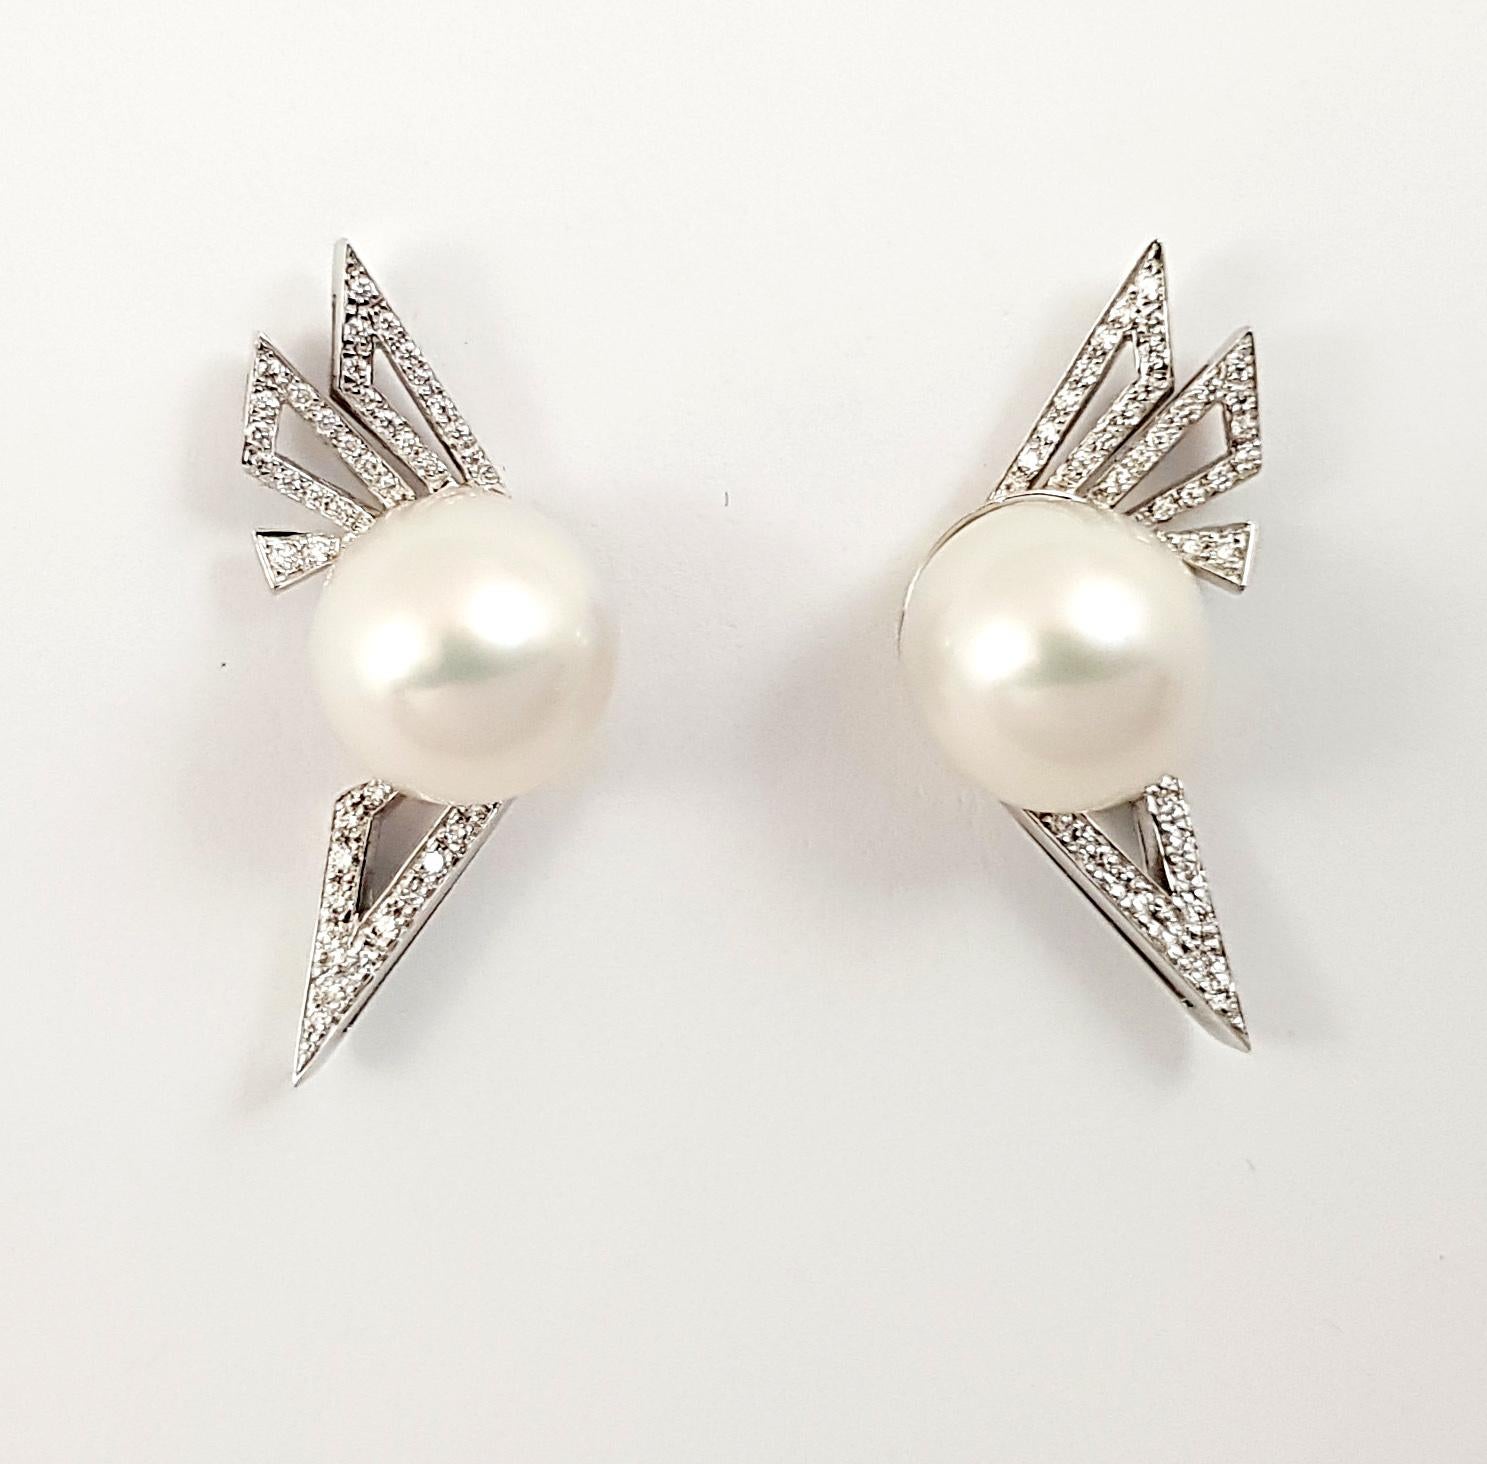 South Sea Pearl and Diamond 0.29 carat Earrings set in 18K White Gold Settings


Width: 1.4 cm
Length: 3.0 cm
Weight: 10.70 grams

The ancient Japanese tradition of paper folding has inspired the form and elements of this modern collection. With a